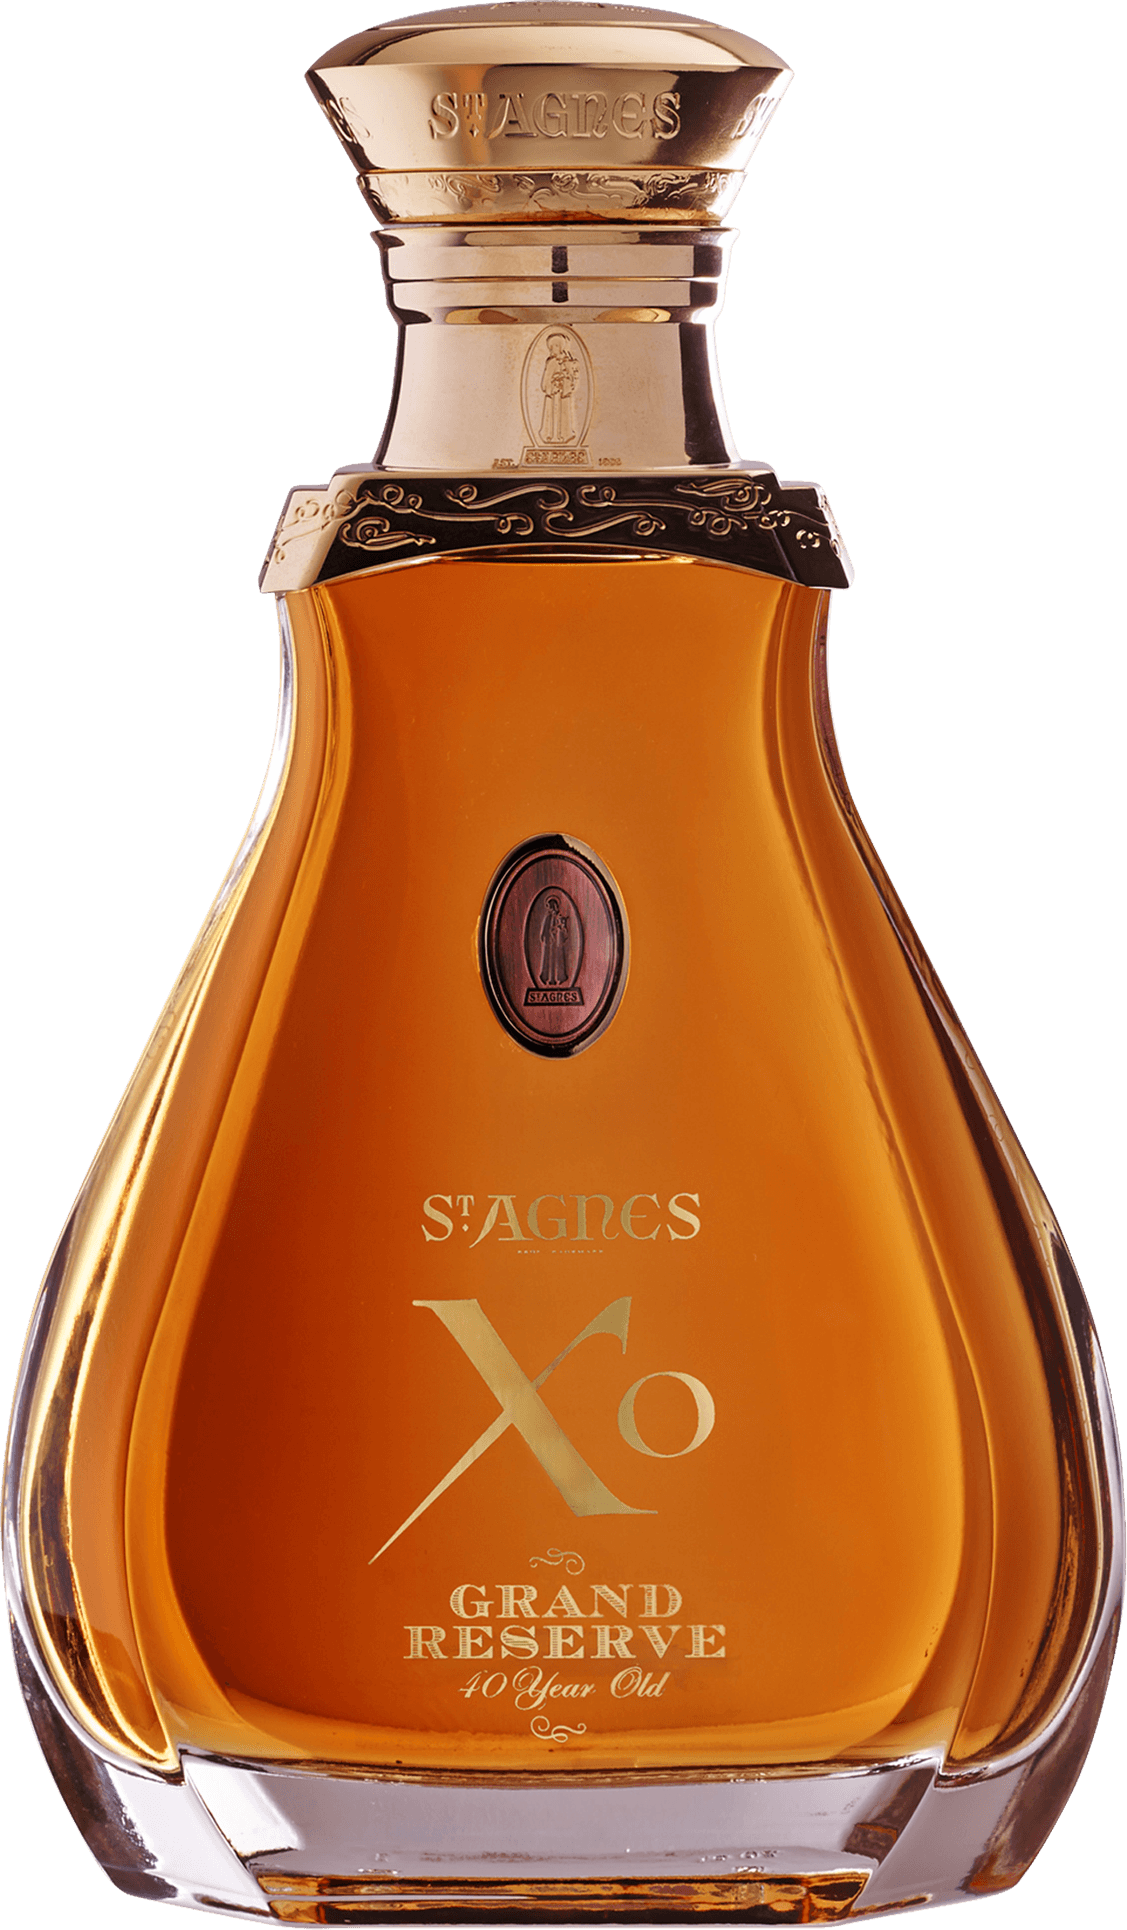 St Agnes - Grand Reserve XO / 40 Year Old / 700mL